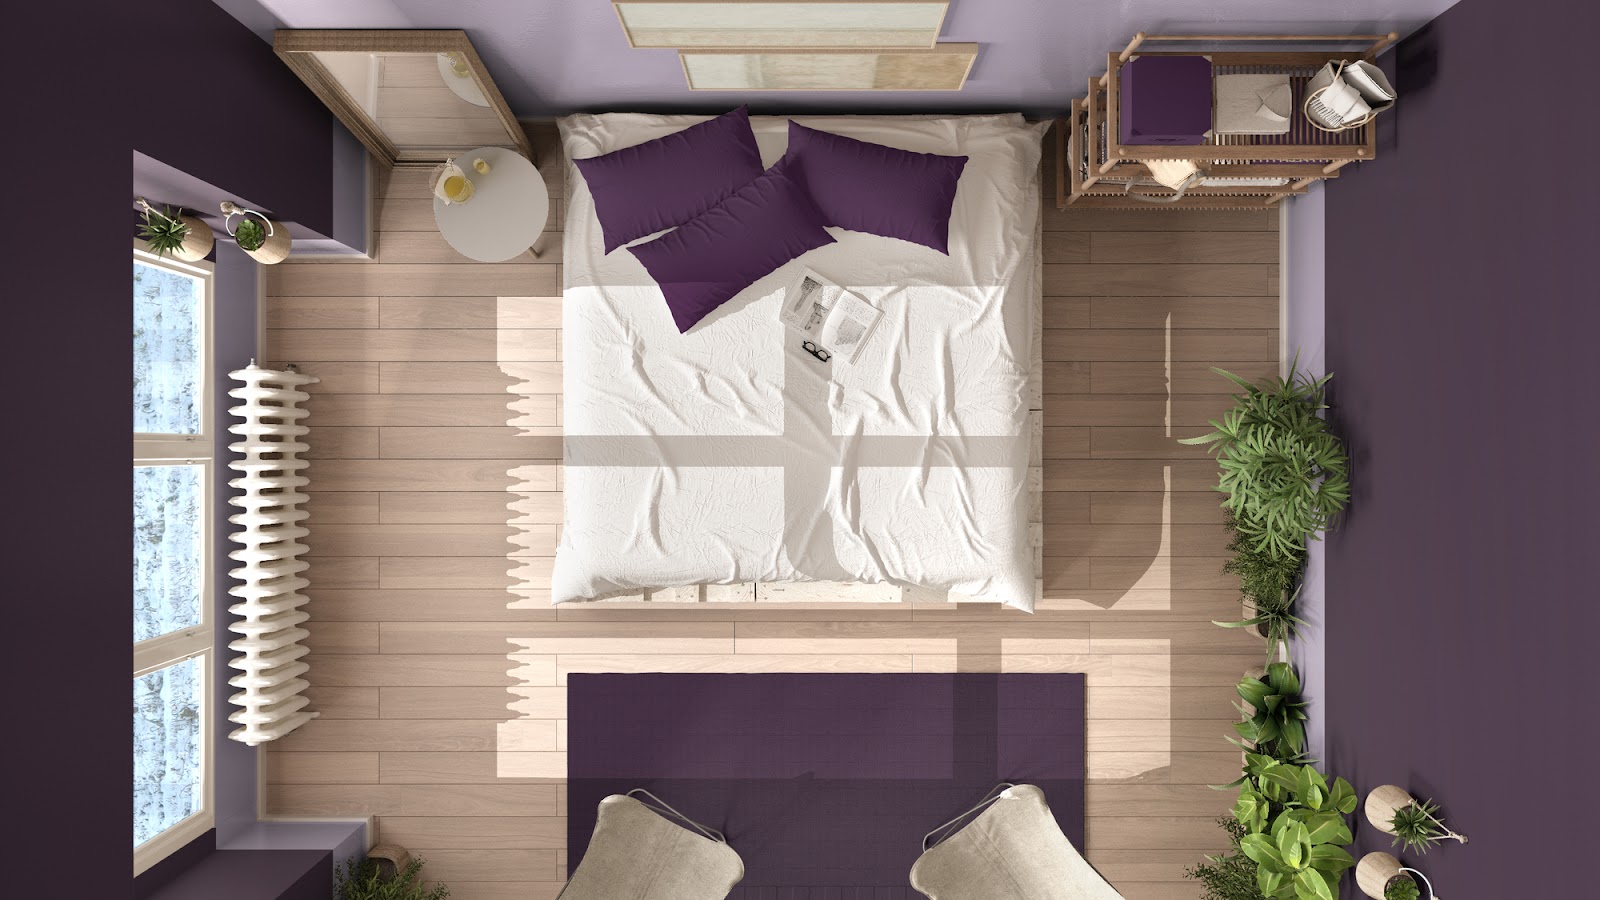 Overhead view of an eco-friendly bedroom featuring natural light, plants, and recycled or low-waste furnishing.